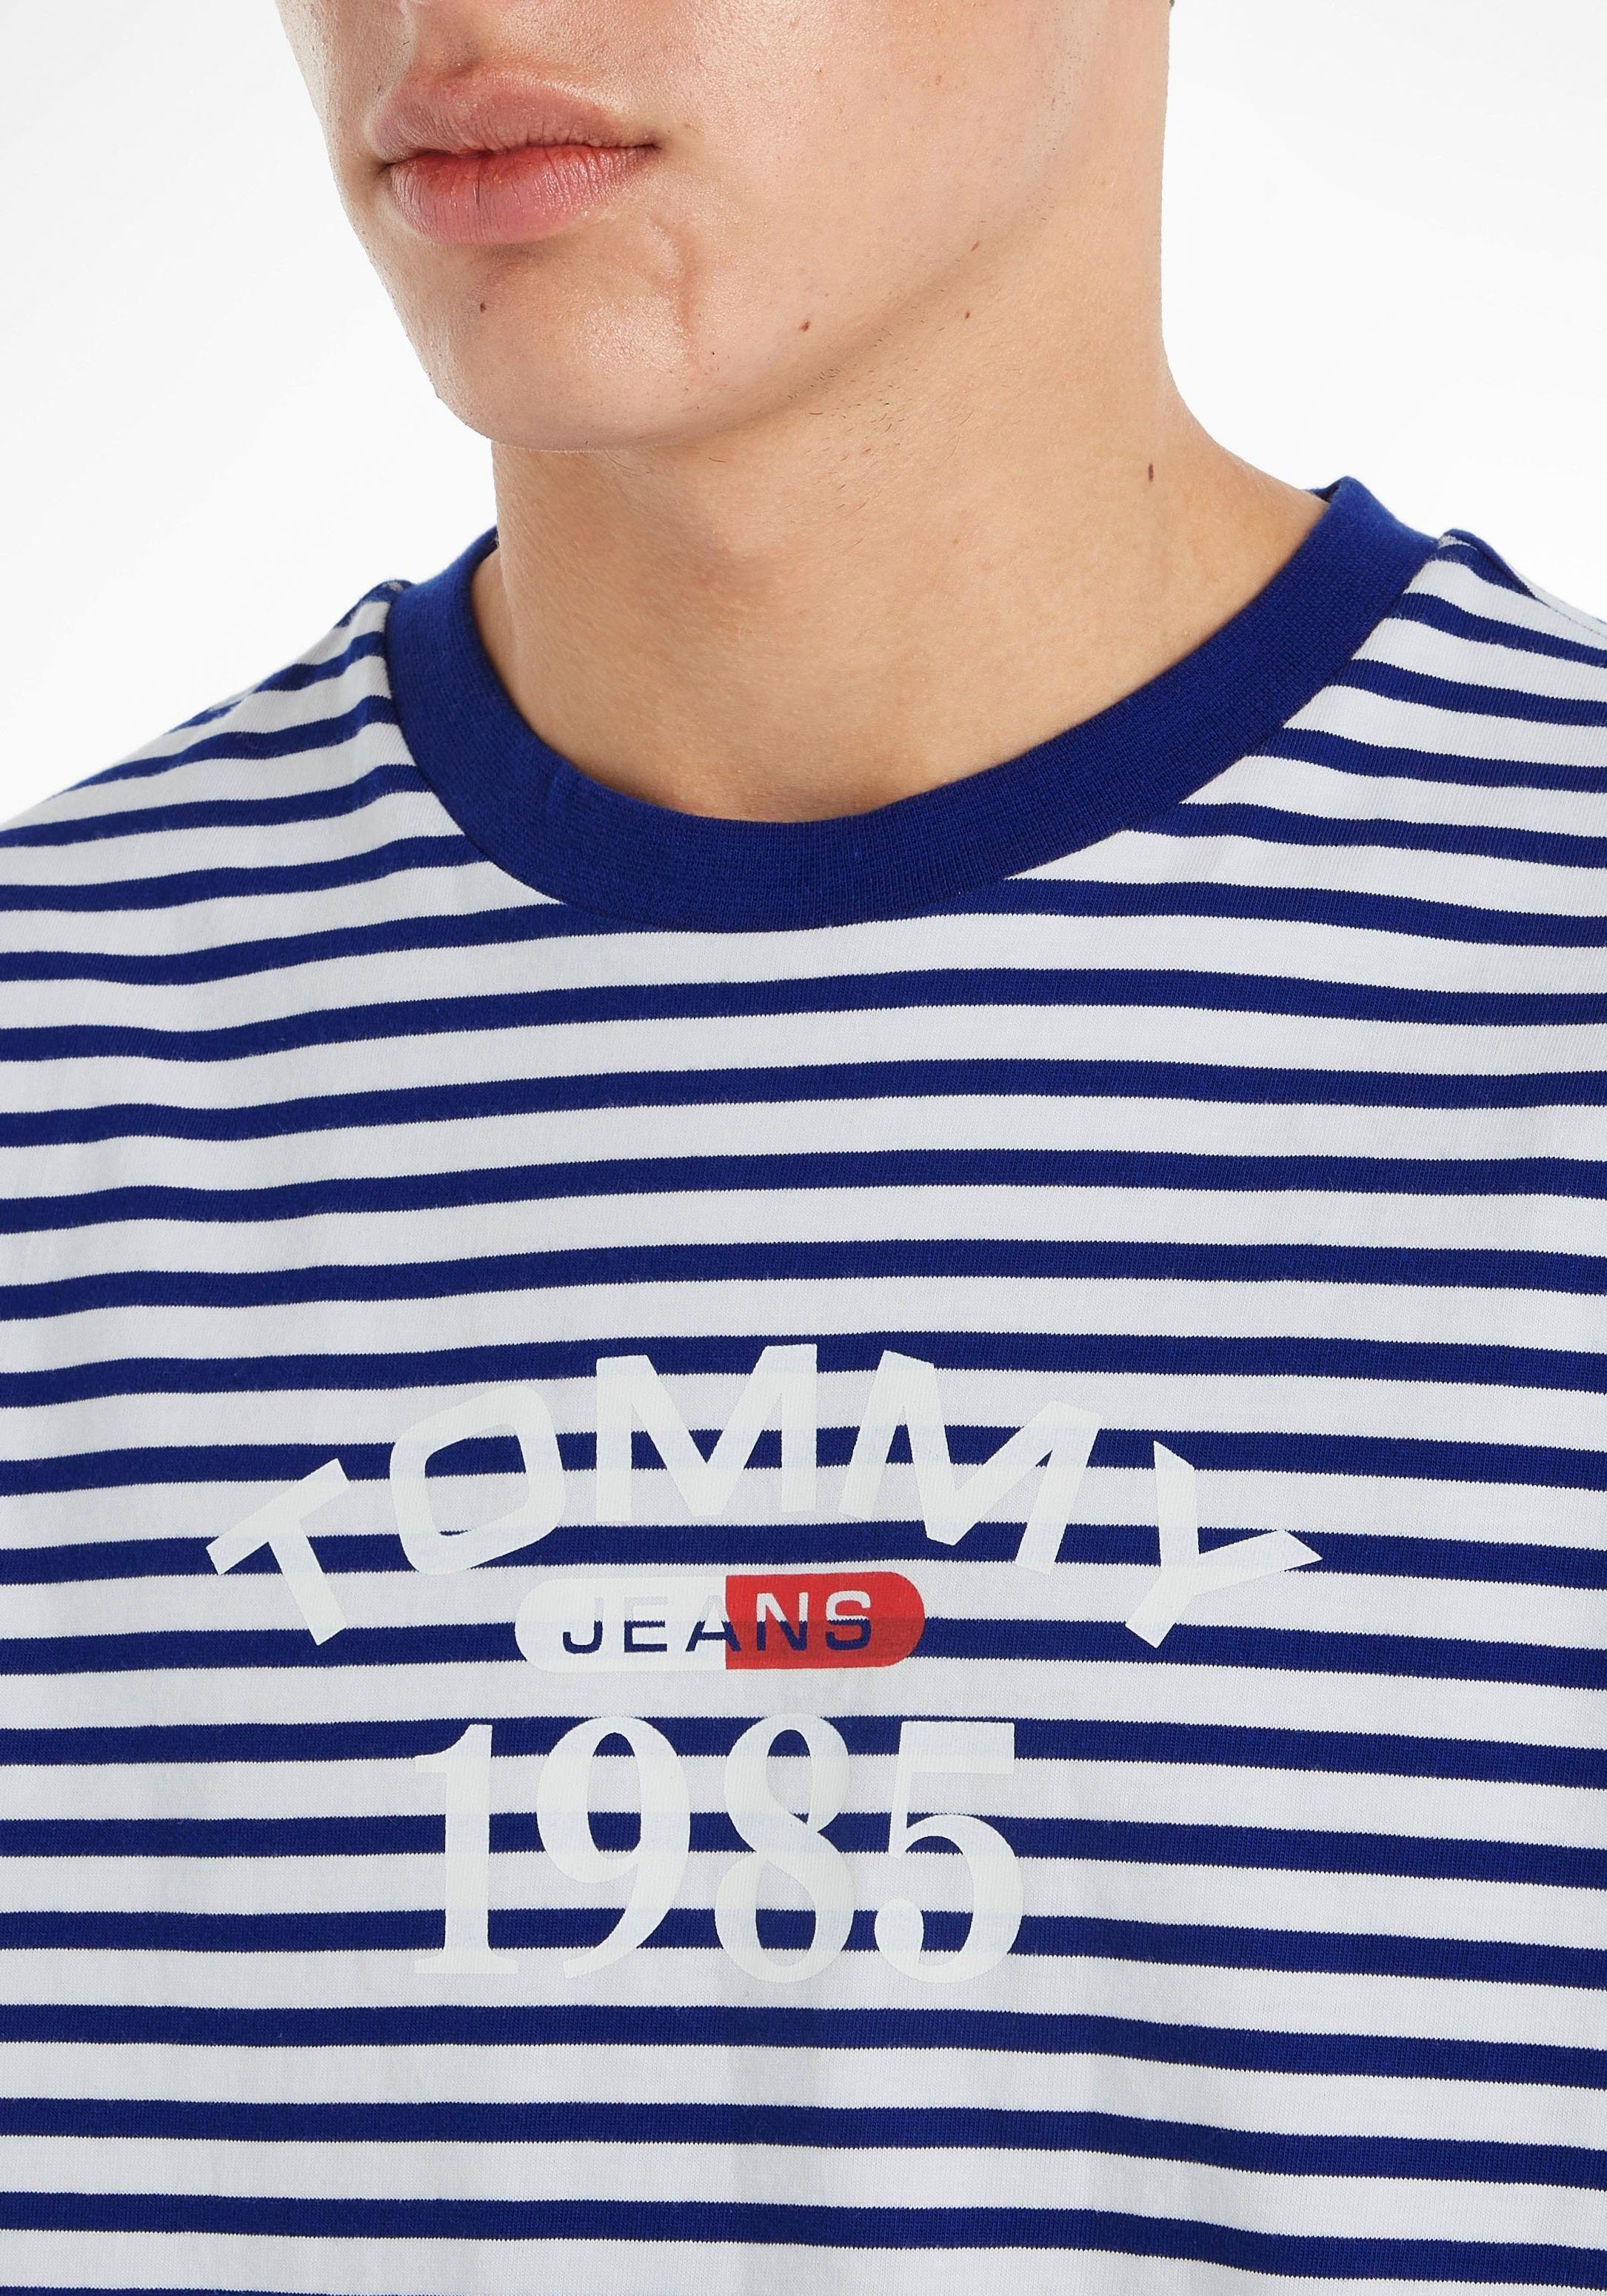 / STRIPE Multi Jeans Voyage TEE TJM GRAPHIC CLSC T-Shirt Navy Tommy